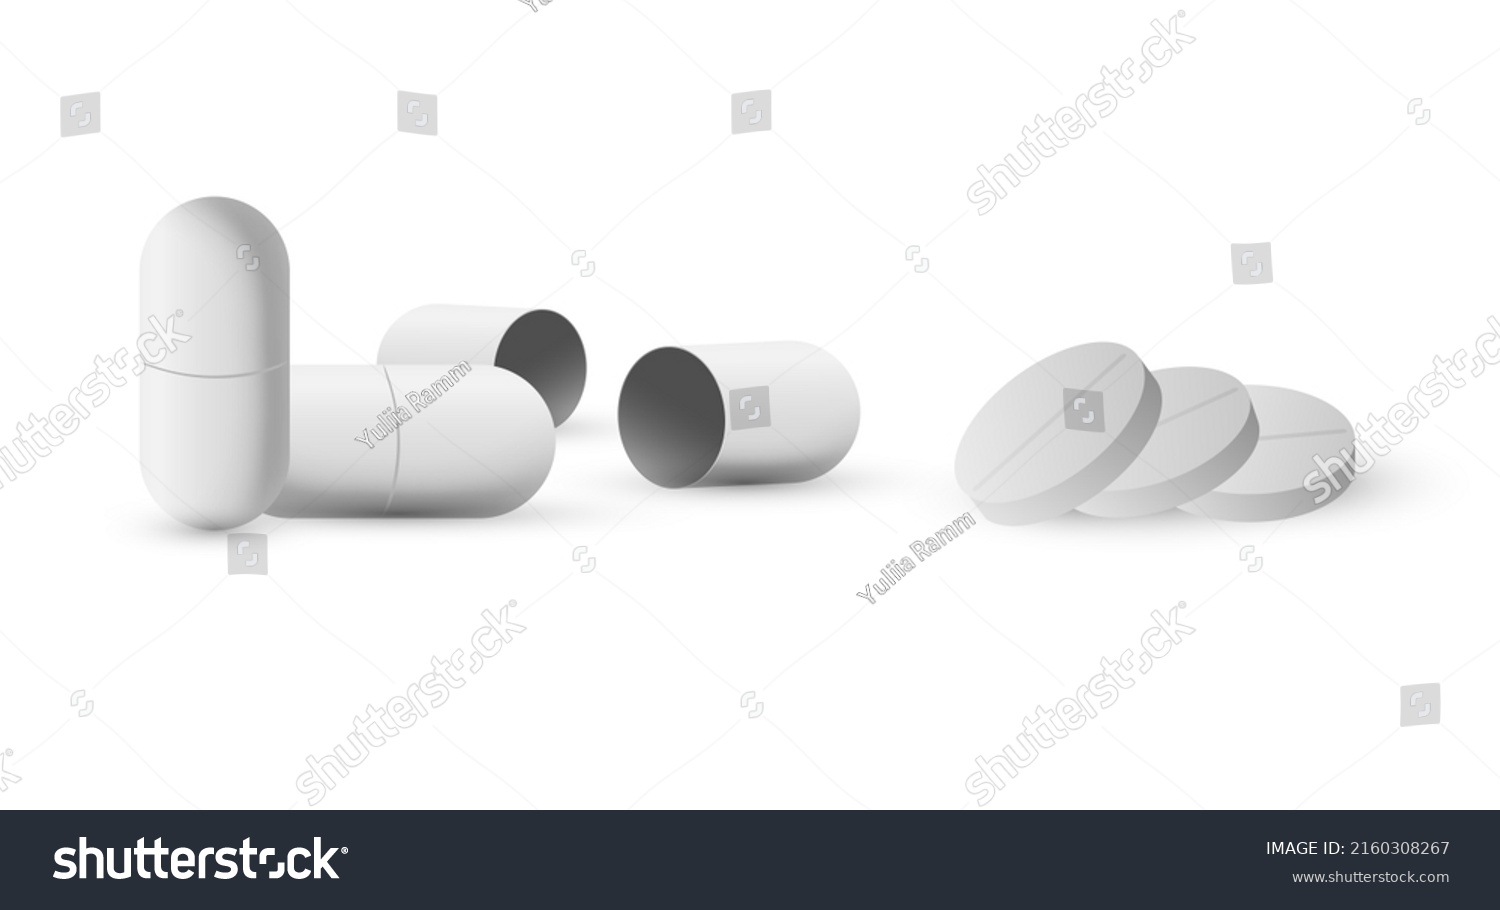 SVG of White pills and capsules on a white background. Medicines, pharmaceuticals, placebo. Vector illustration svg